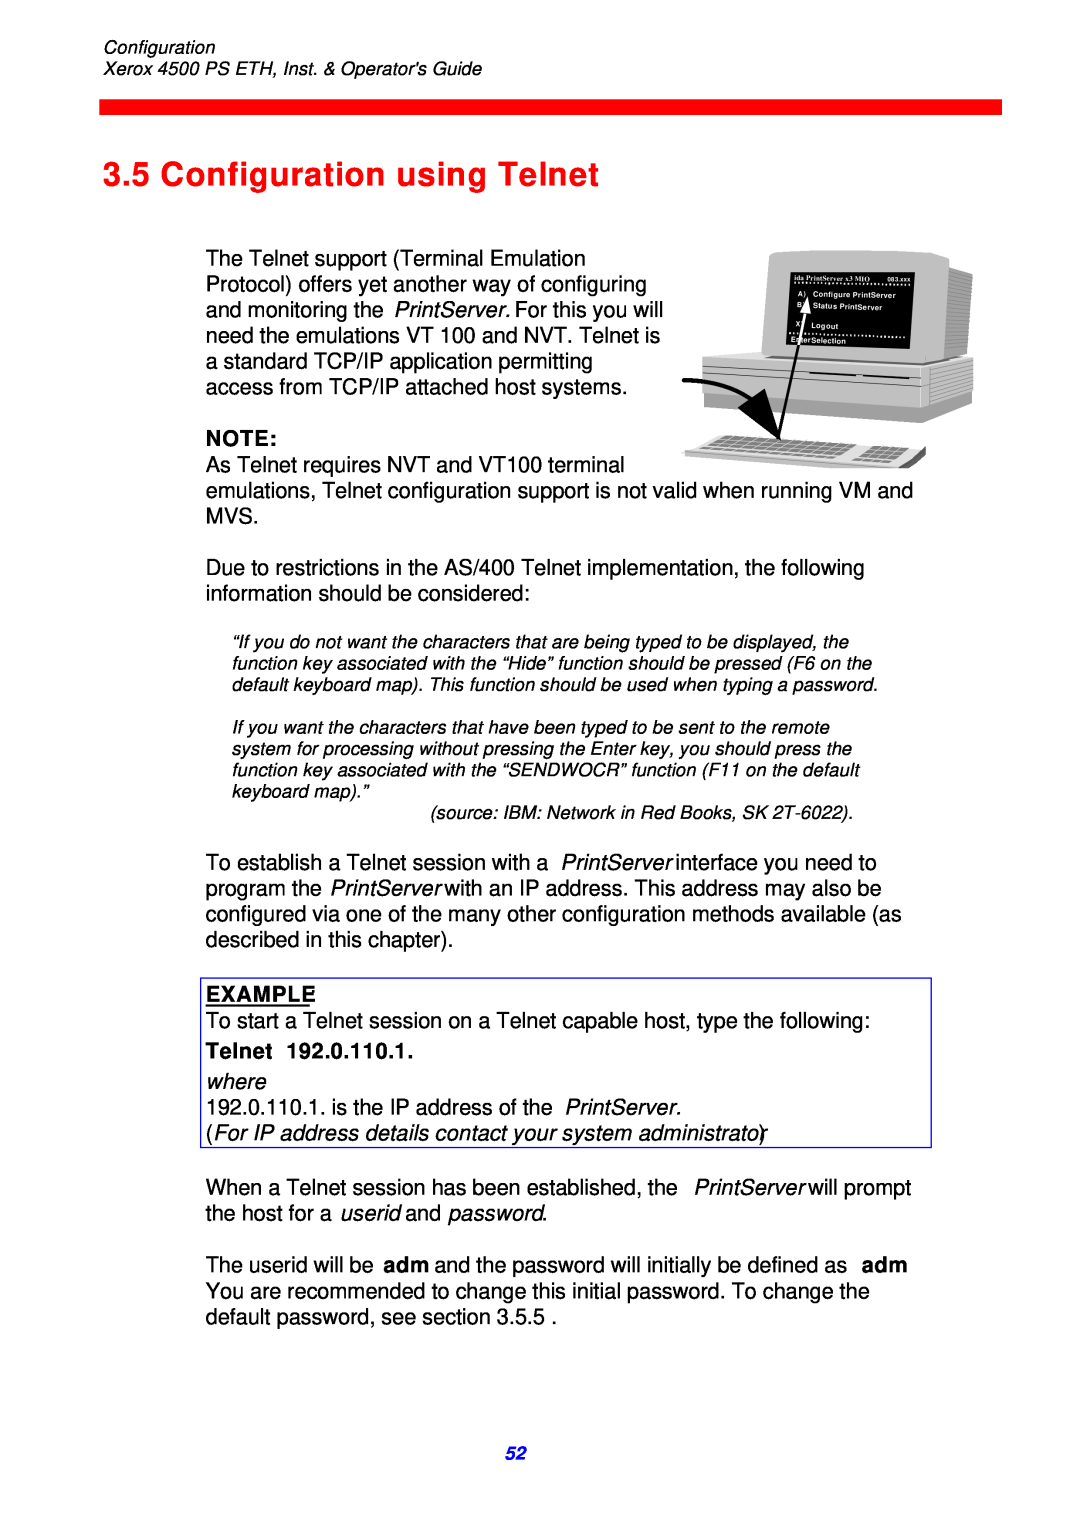 Xerox 4500 ps eth Configuration using Telnet, Example, where, For IP address details contact your system administrator 